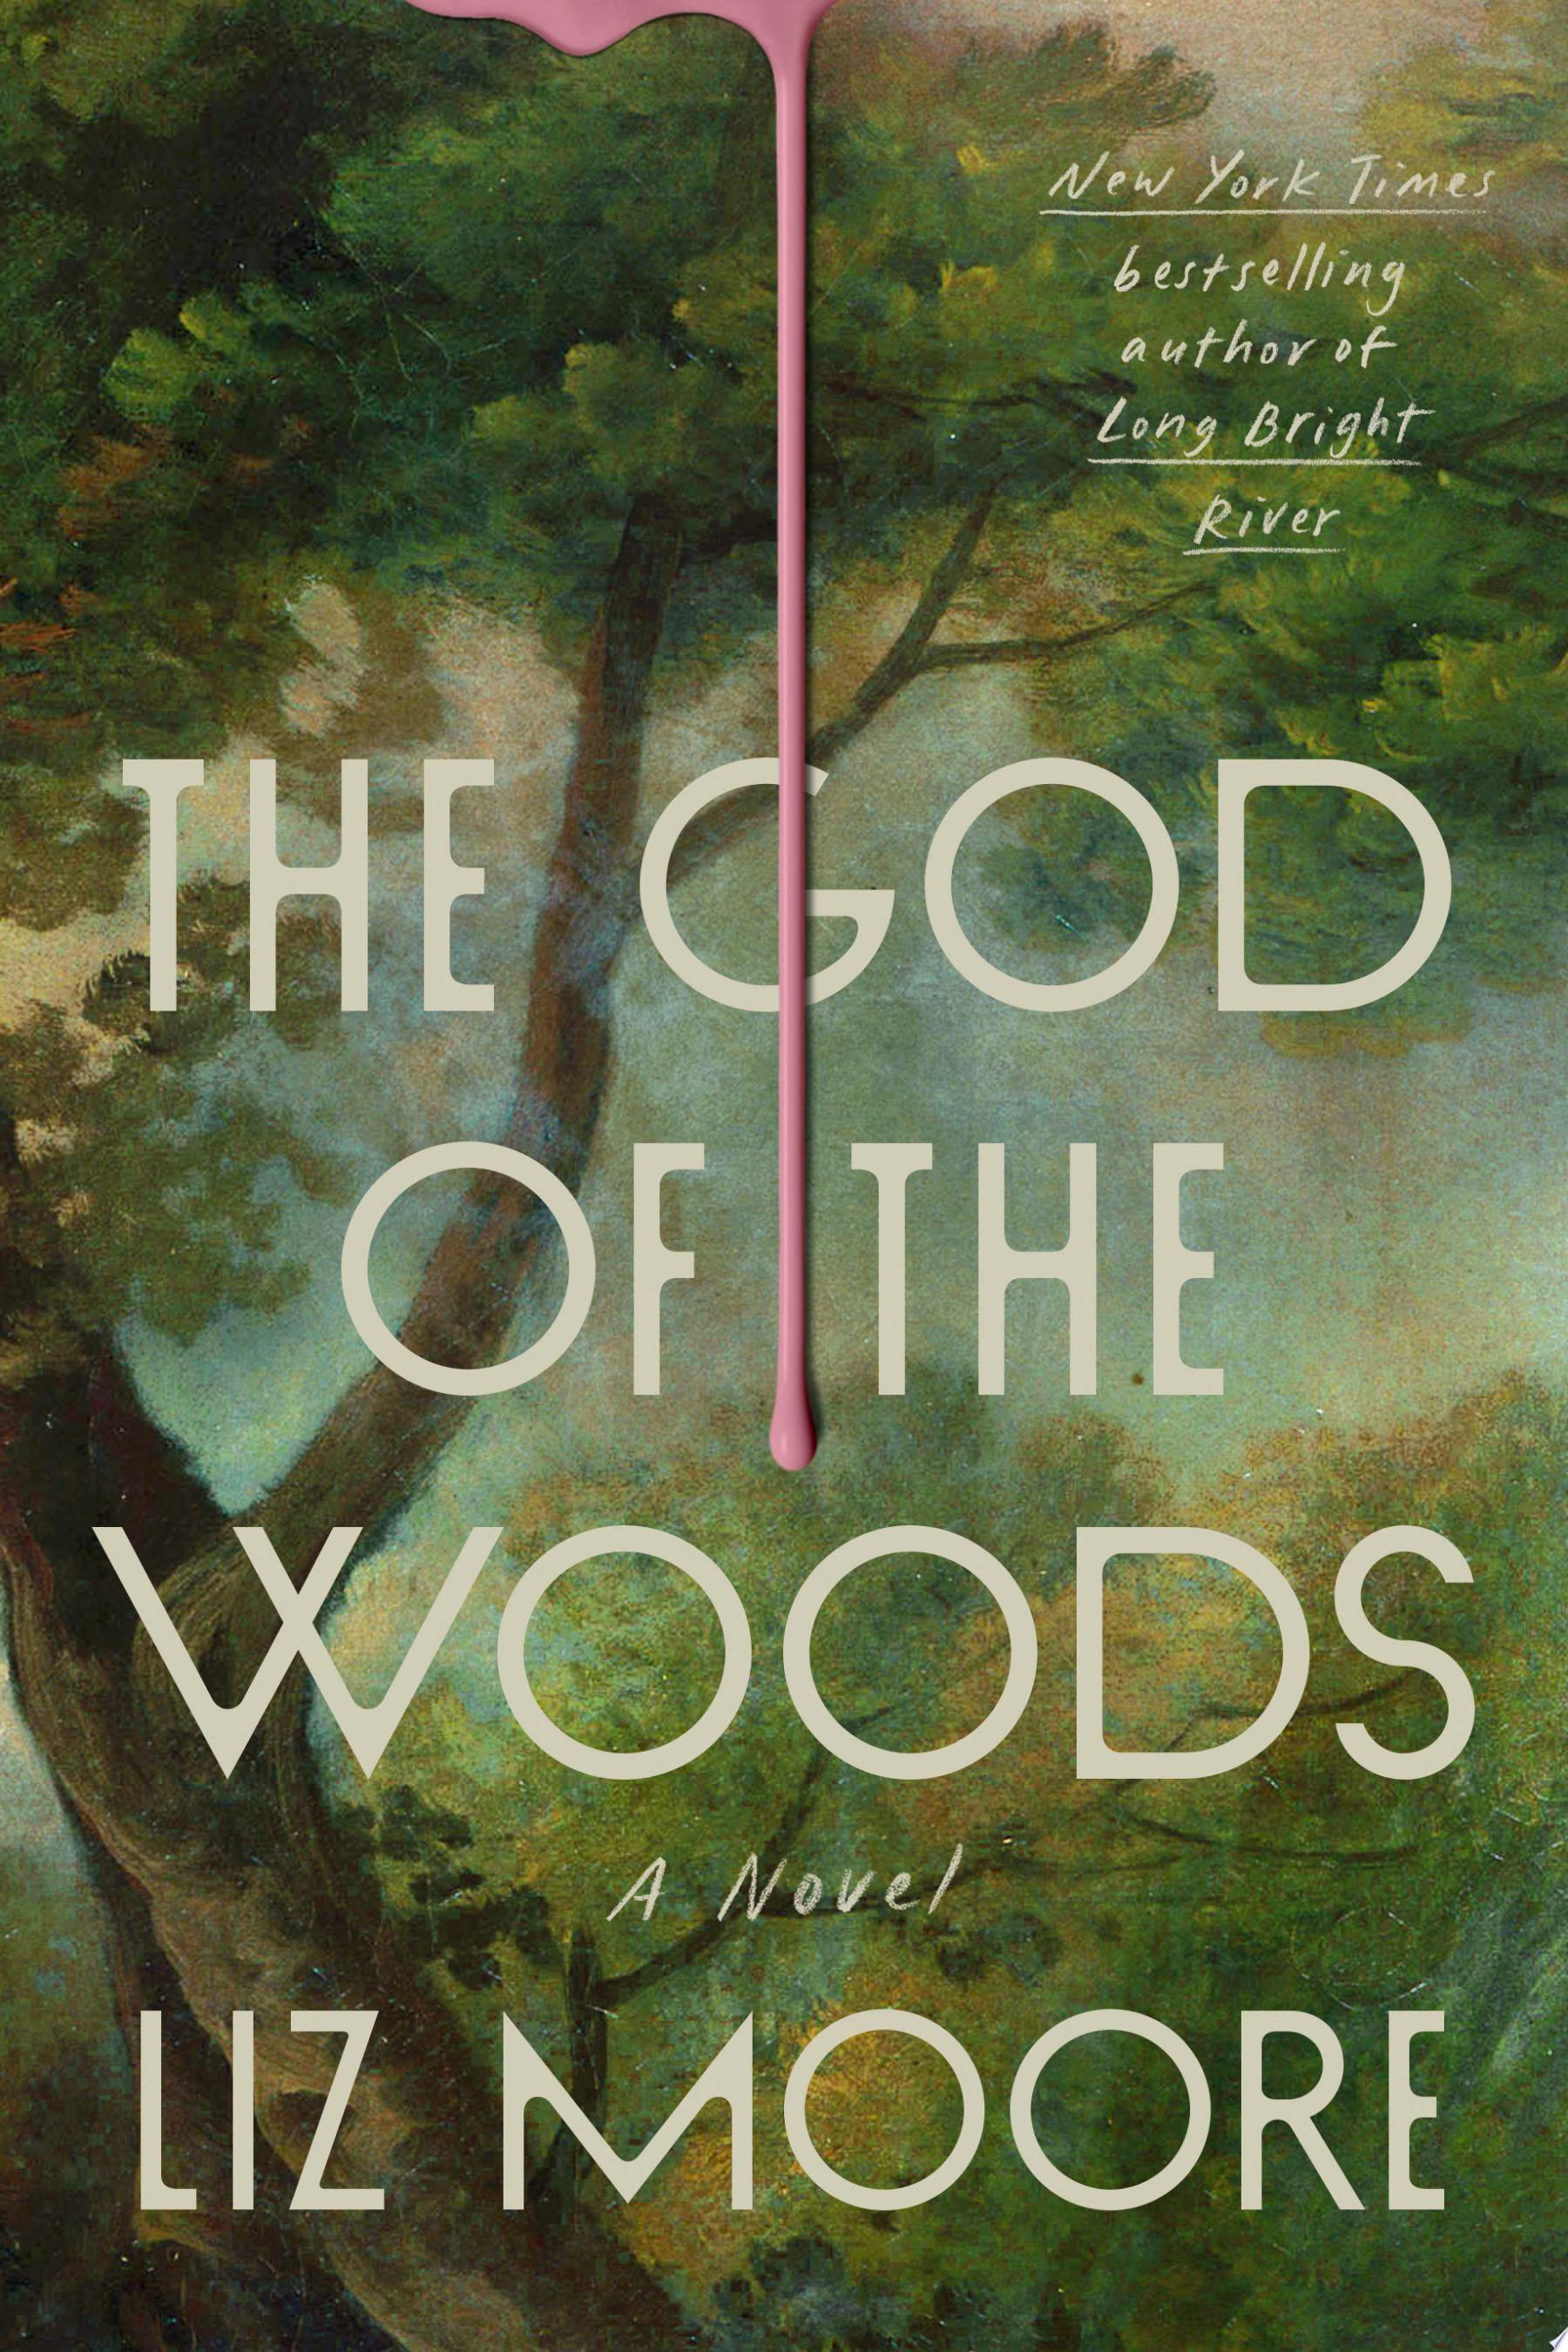 Image for "The God of the Woods" by Liz Moore